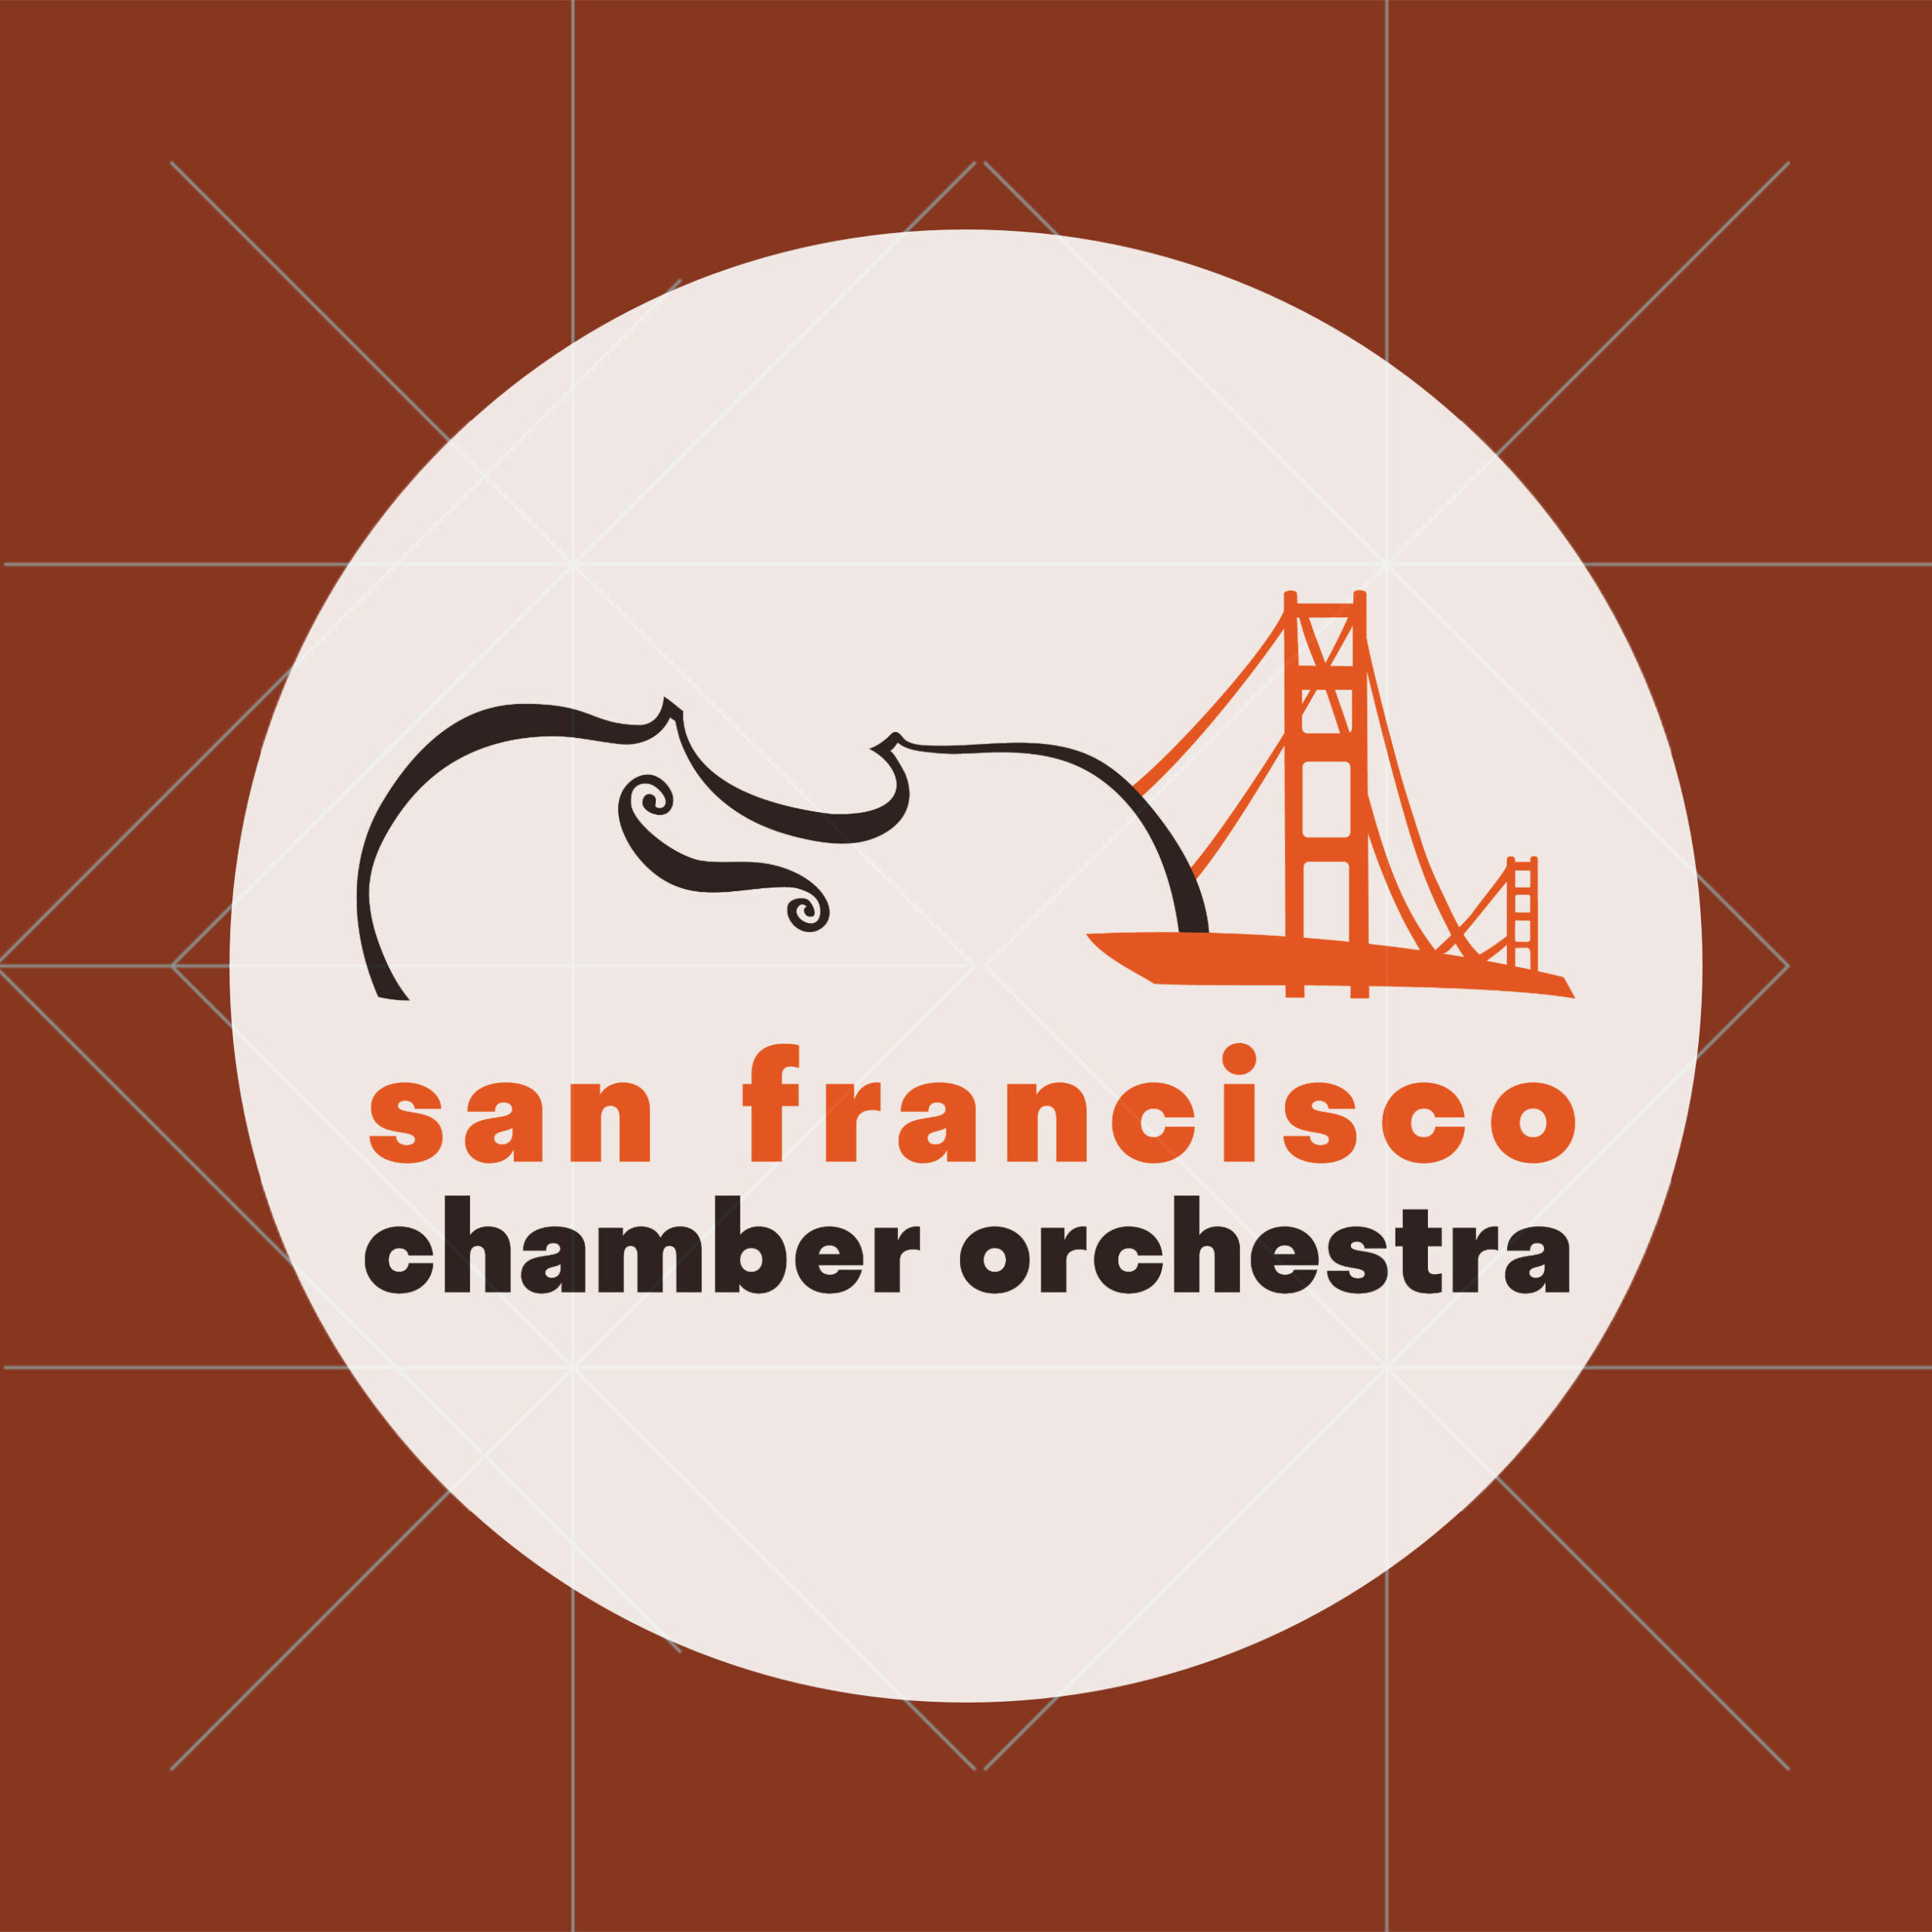 The San Francisco Chamber Orchestra